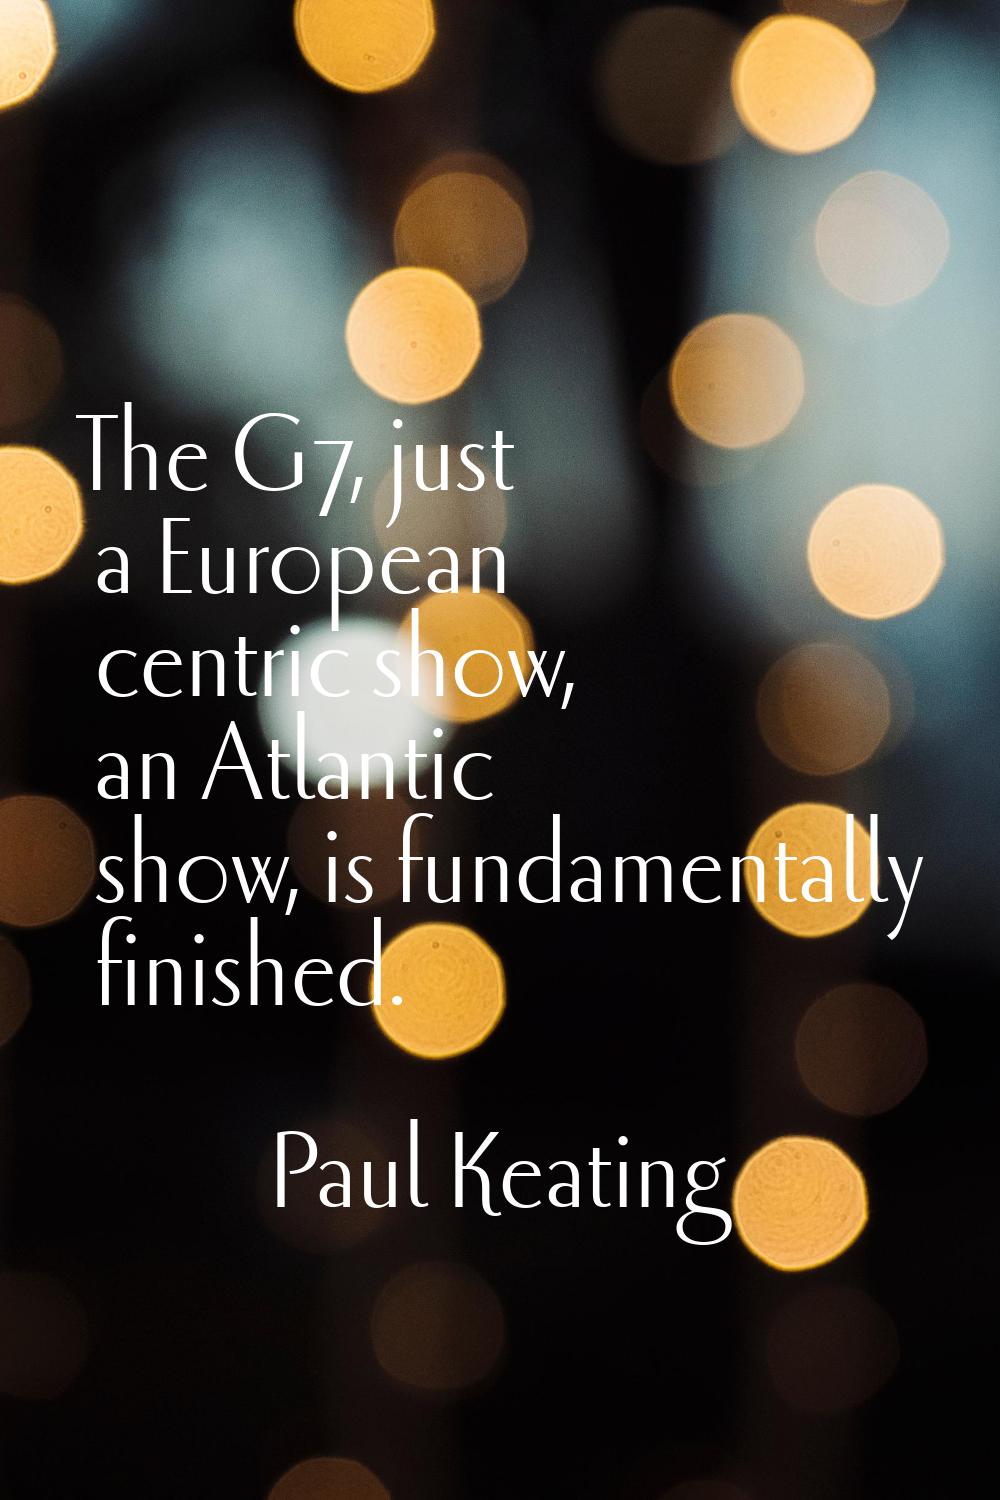 The G7, just a European centric show, an Atlantic show, is fundamentally finished.